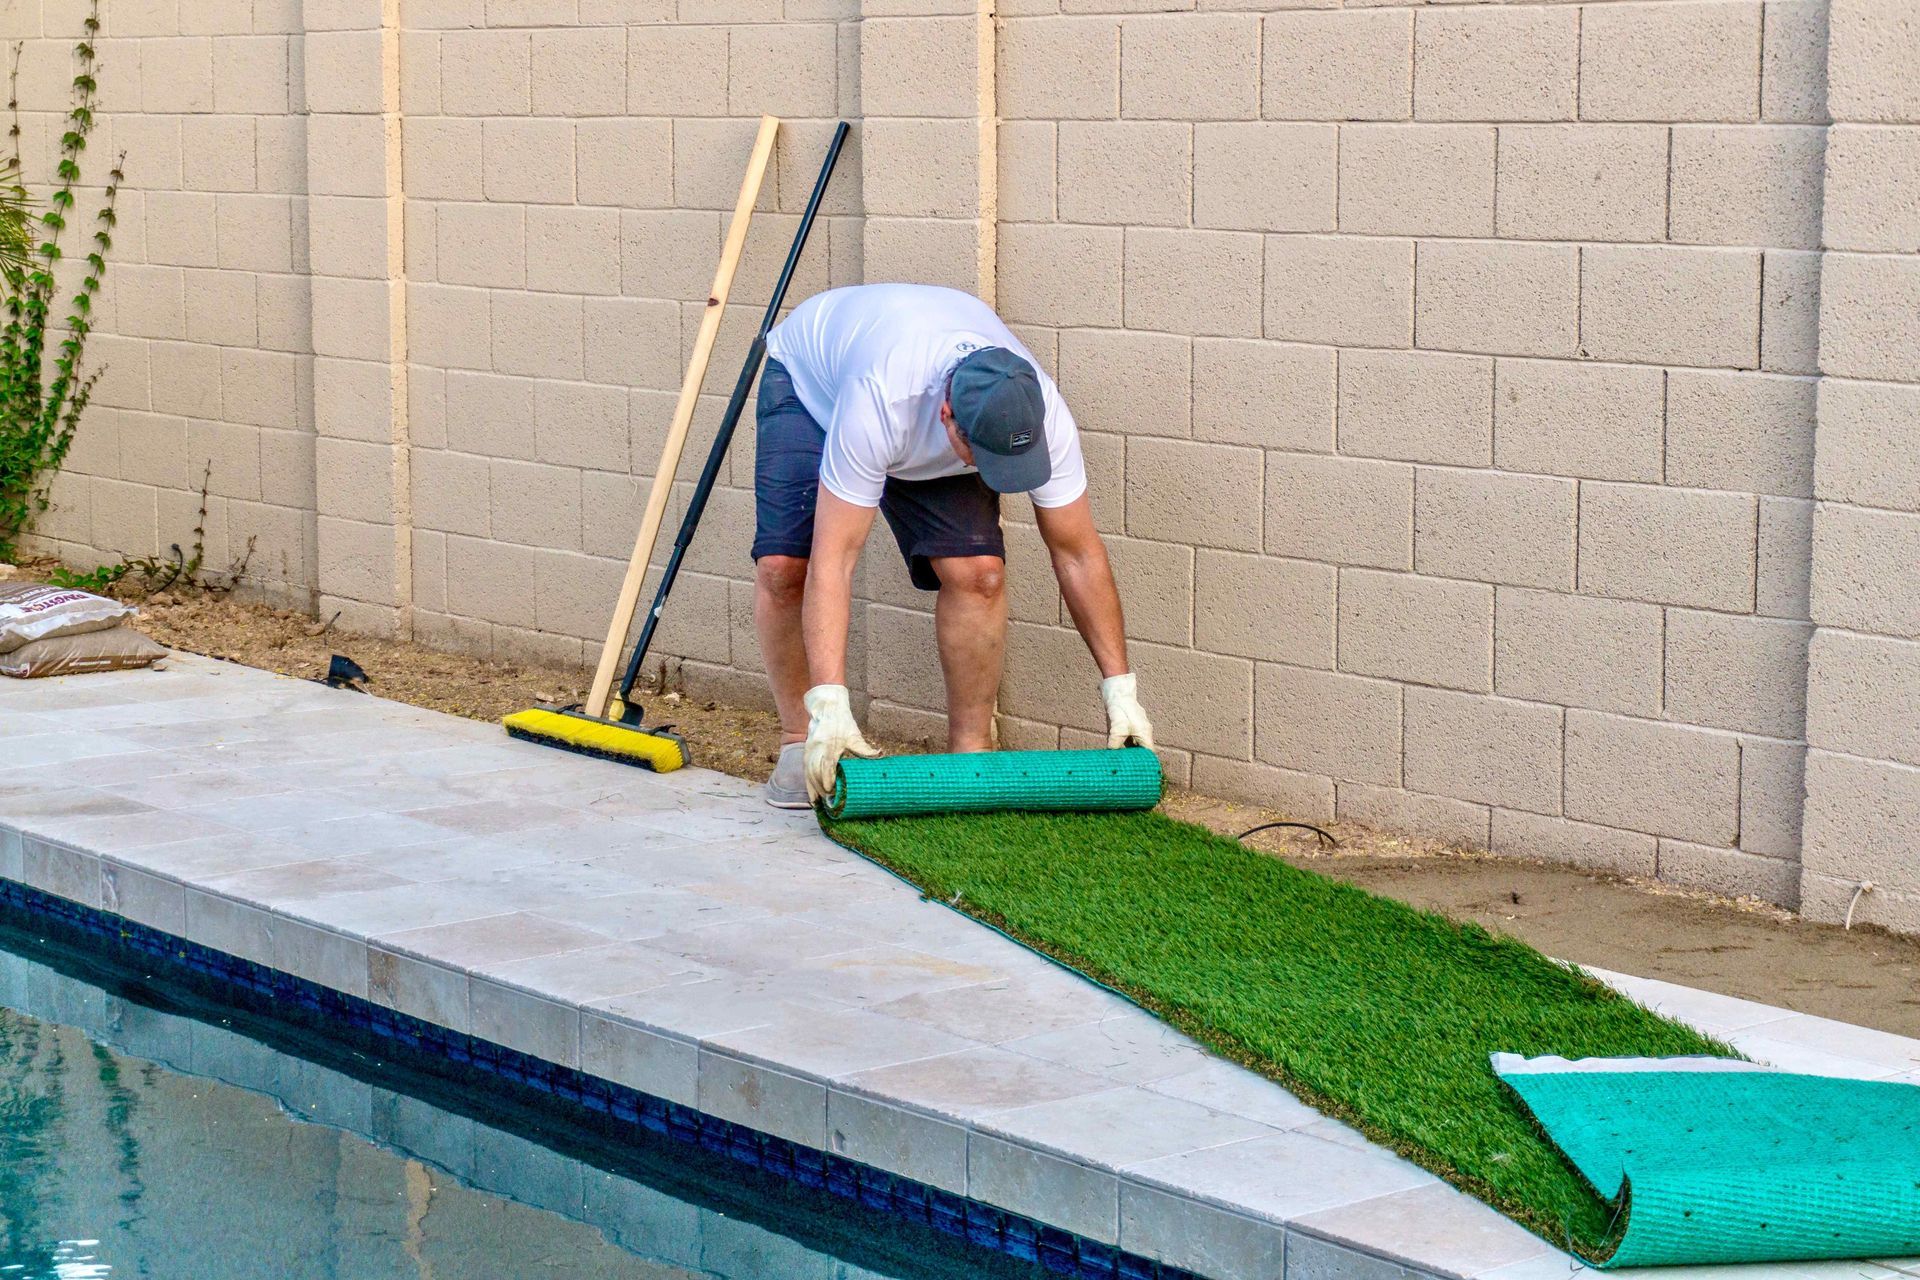 Affordable Landscaper Rolling Out Artificial Turf Near Pool